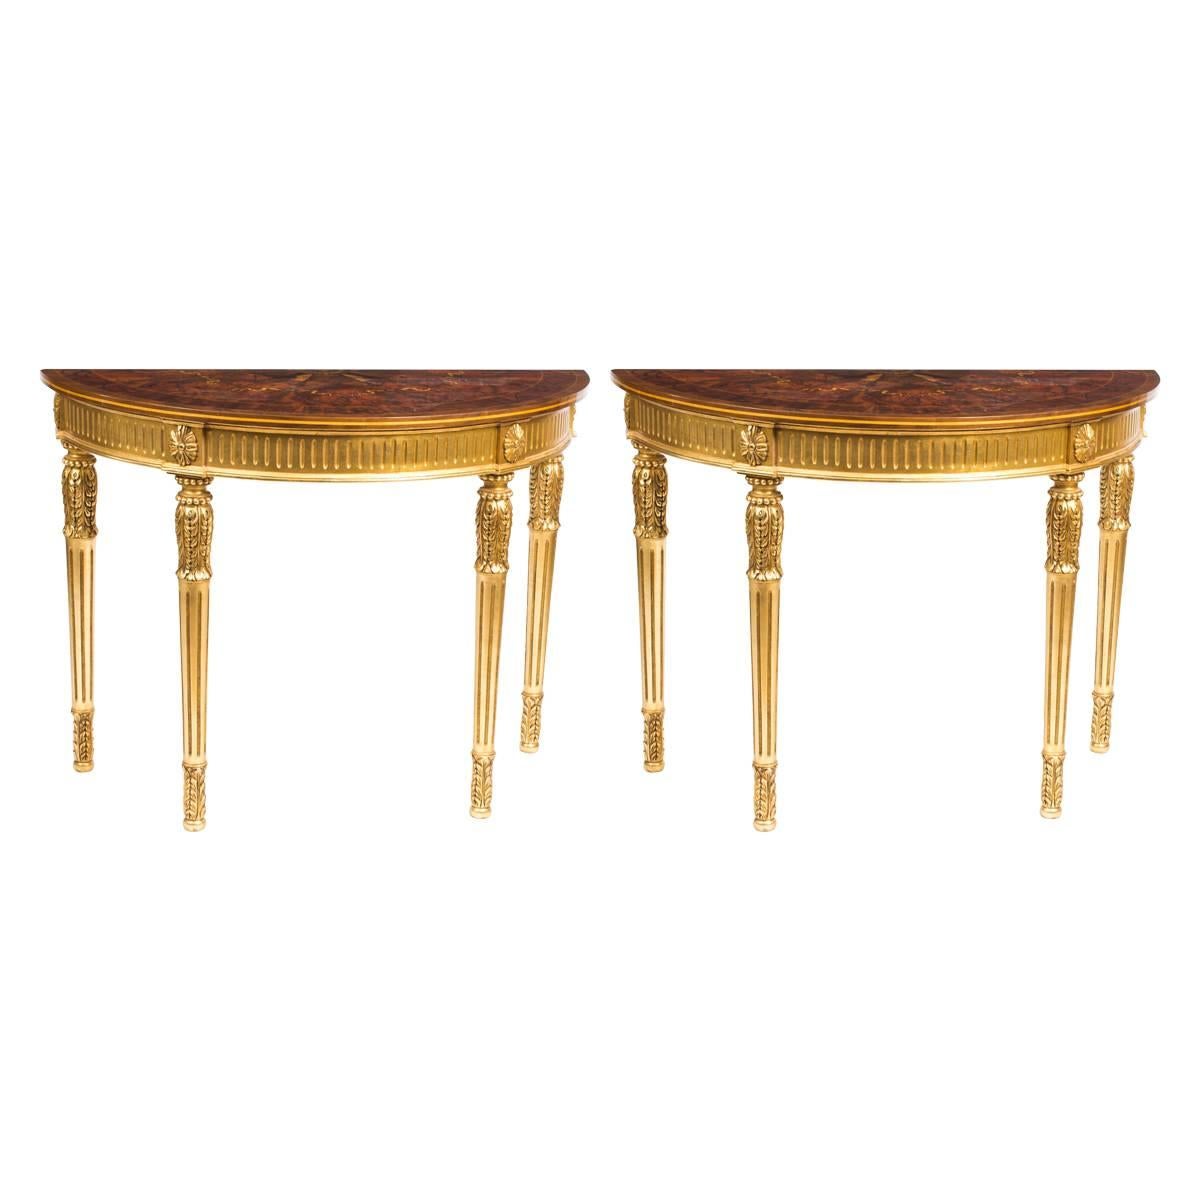 Stunning Pair of Giltwood Half Moon Marquetry Console Tables, 20th Century